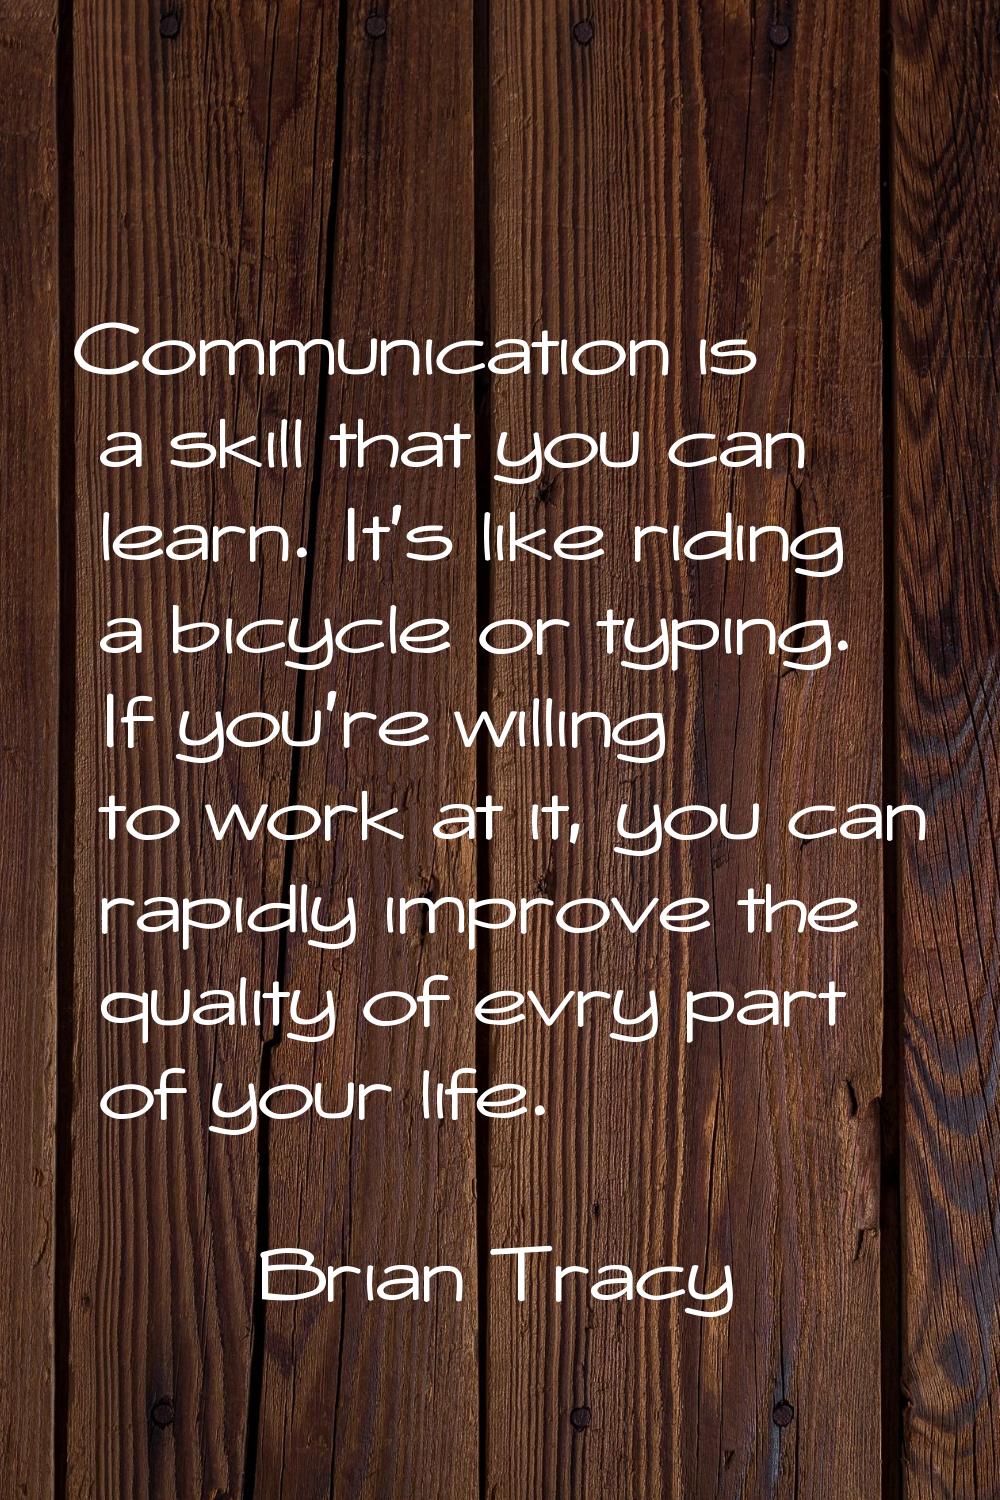 Communication is a skill that you can learn. It's like riding a bicycle or typing. If you're willin